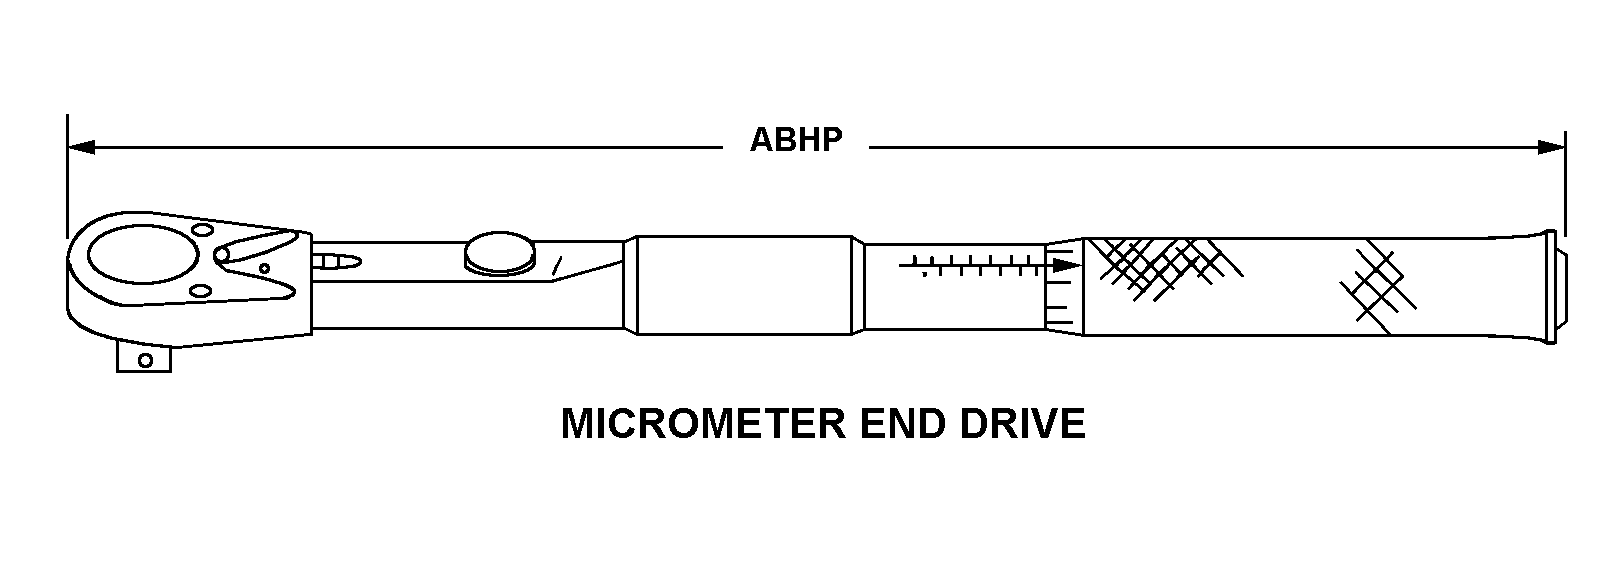 MICROMETER END DRIVE style nsn 5120-01-496-6652